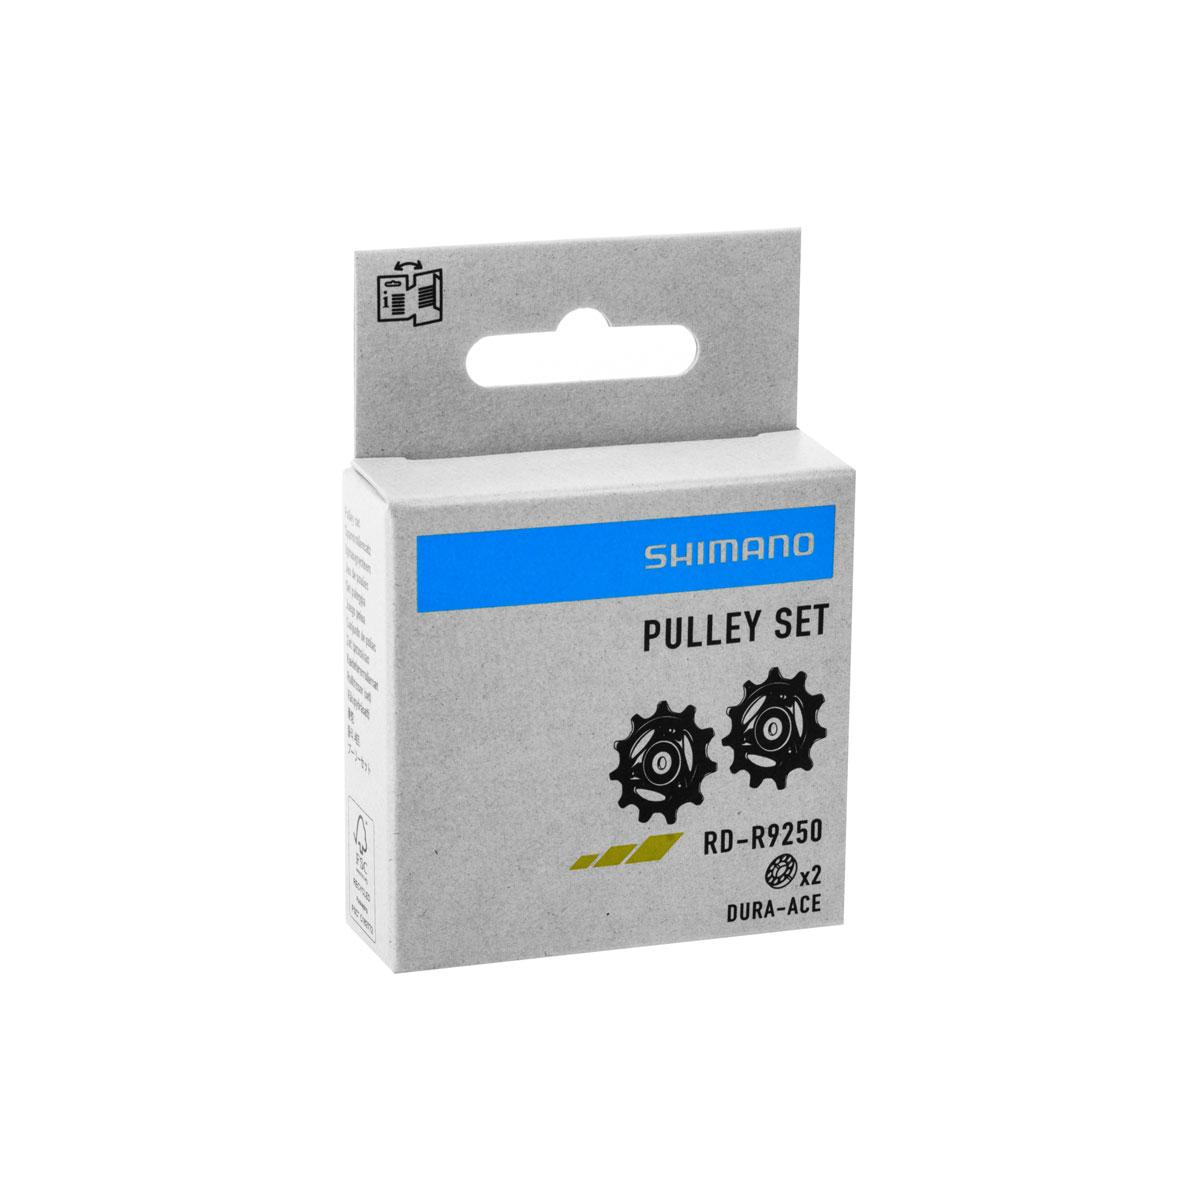 Shimano Pulleys Dura Ace RD-R9250 12-speed. Pulleys for Rear Derailleur